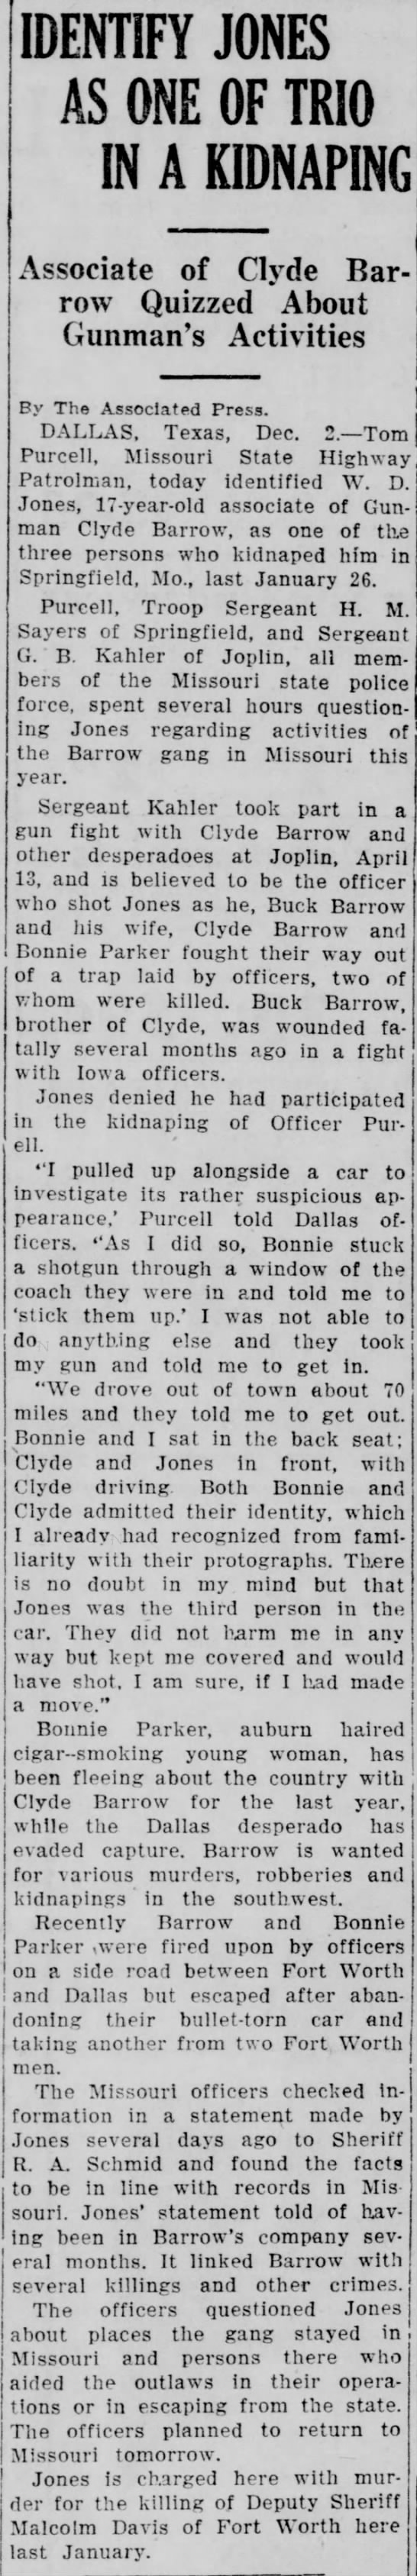 Associate of Bonnie and Clyde accused of kidnapping a highway patrolman in December 1933 - 